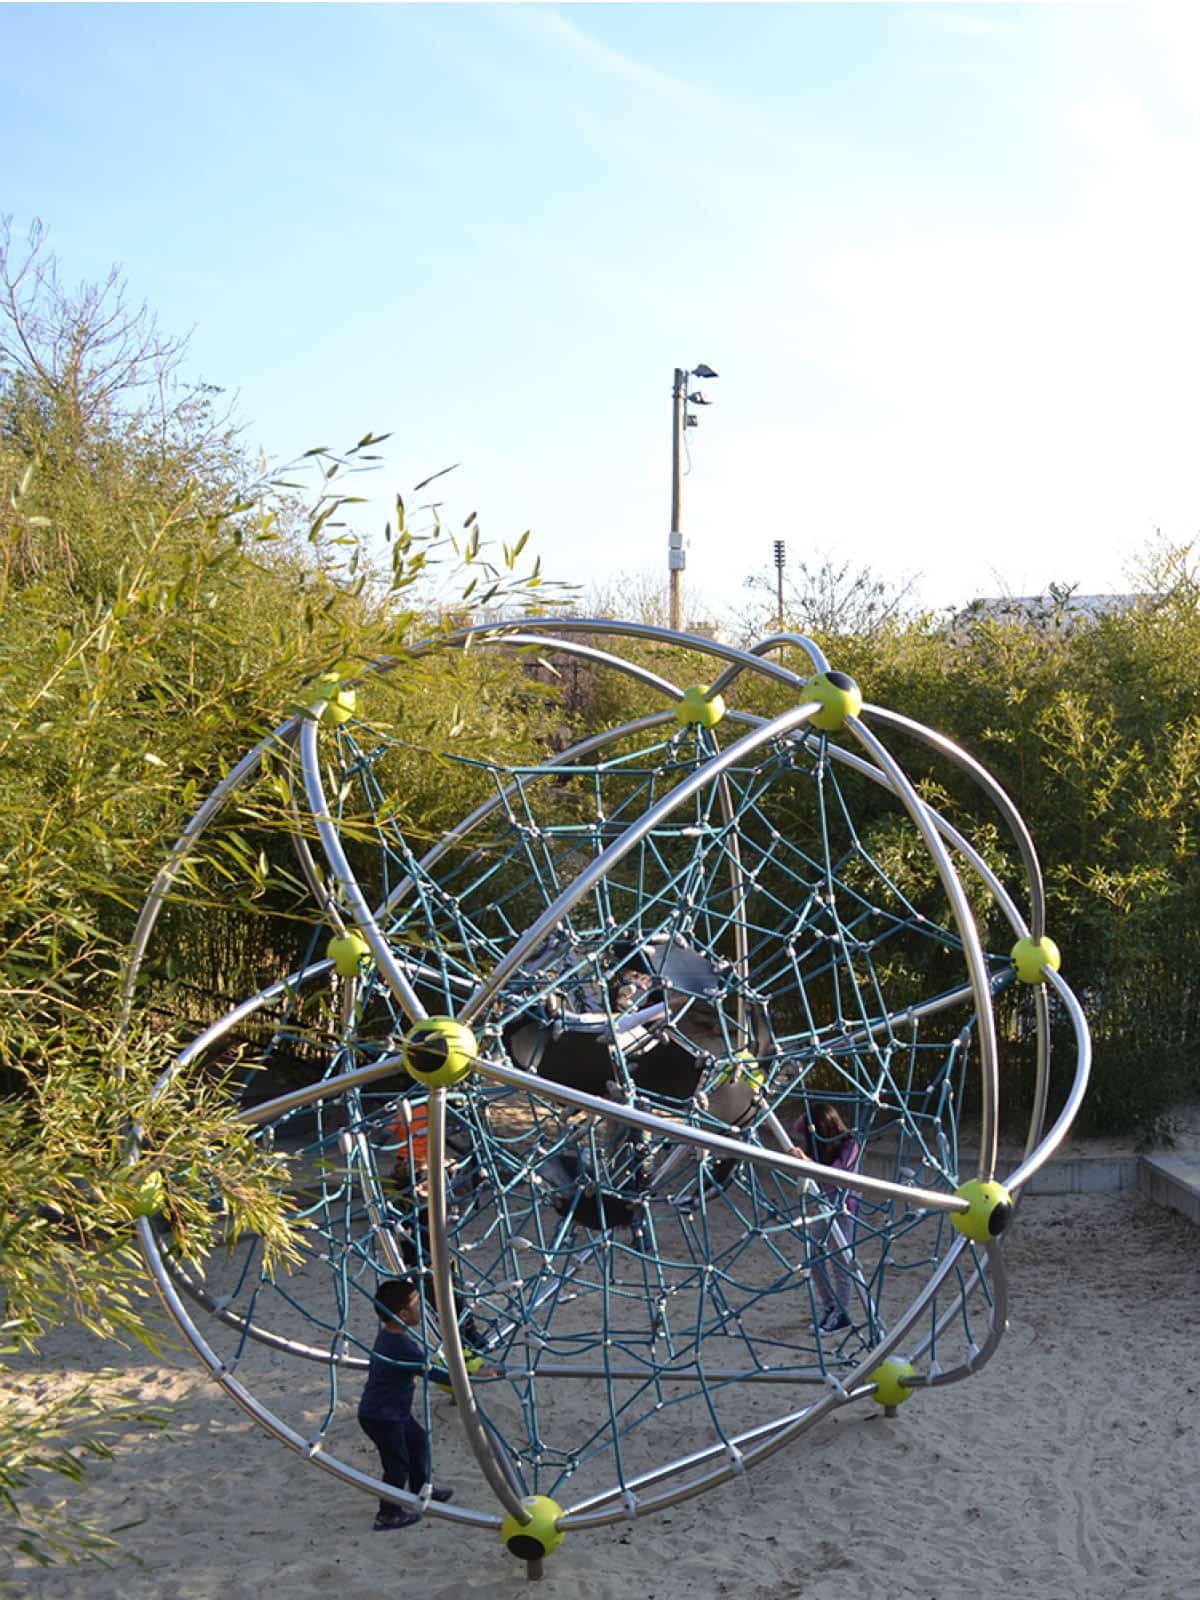 Children playing on round mental climbing structure surrounded by bushes at sunset.